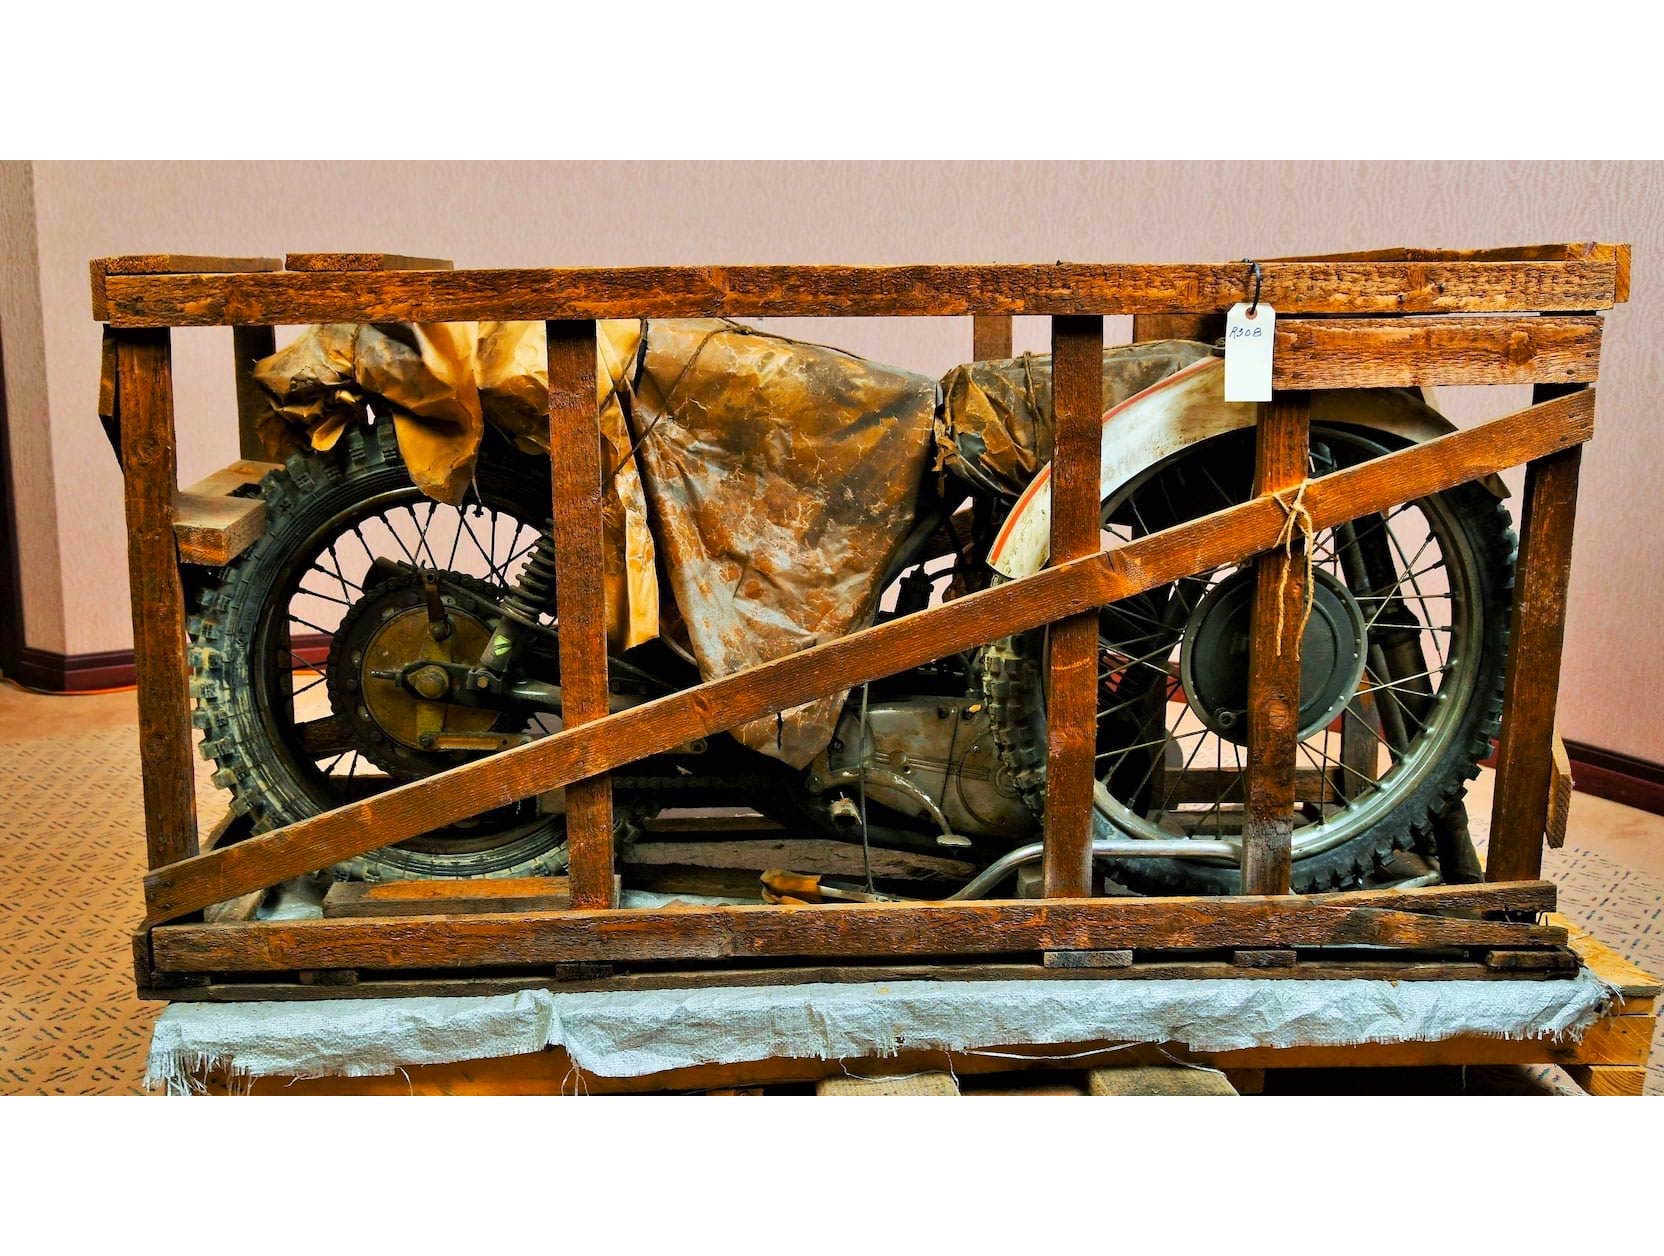 Coffin Tank CZ Motorcycle In Crate